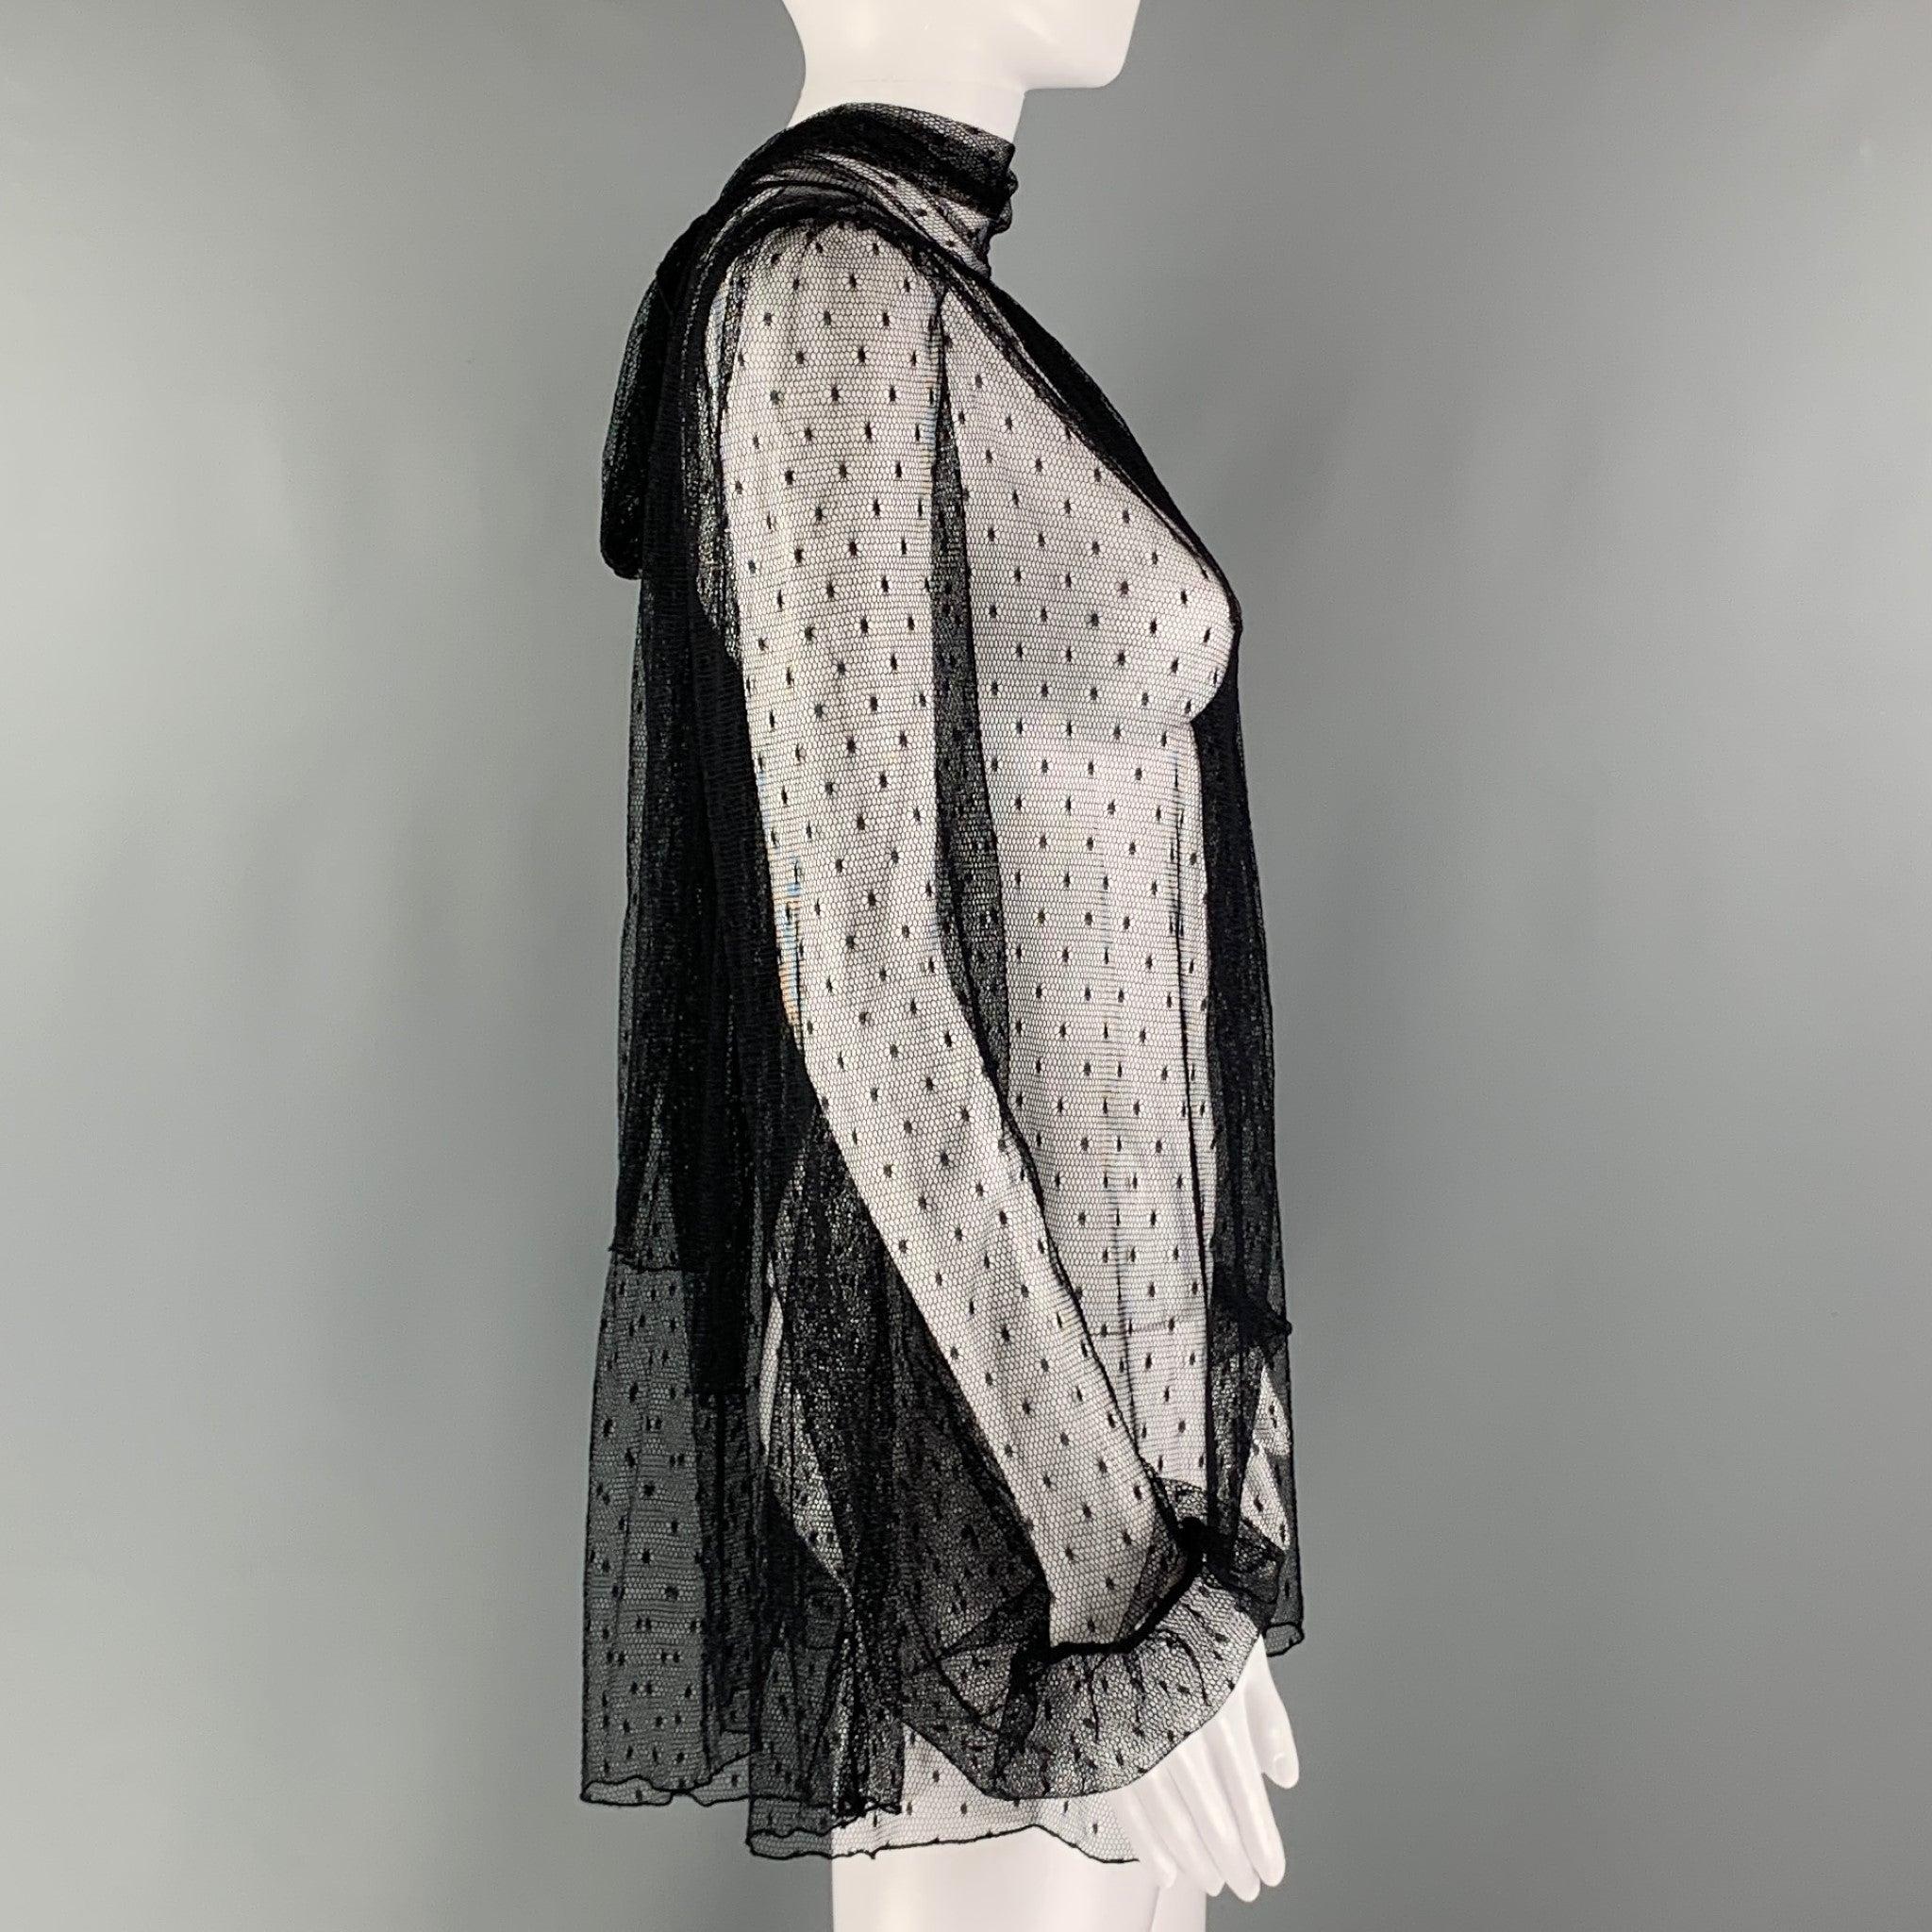 LA PERLA COLLEZIONE
long sleeves shirt comes in black polka dots mesh knit material featuring an oversized style, elastic cuff, see through style, high neck, and bow tie detail at back. Made in Italy.Excellent Pre-Owned Condition.  

Marked:   40